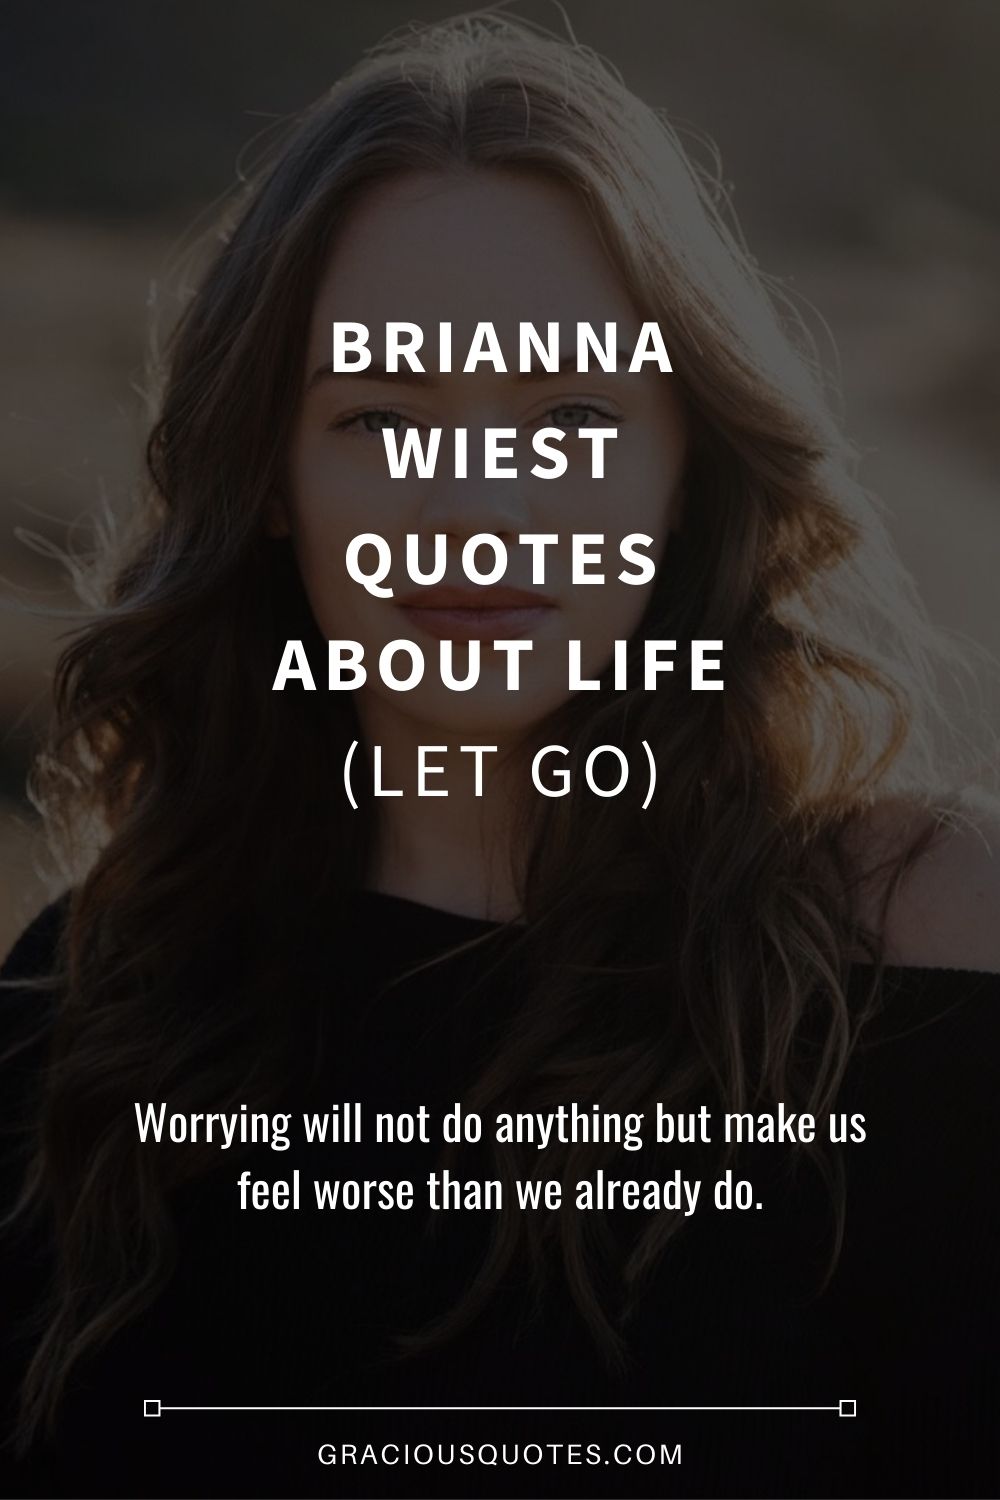 Brianna Wiest Quotes About Life (LET GO) - Gracious Quotes